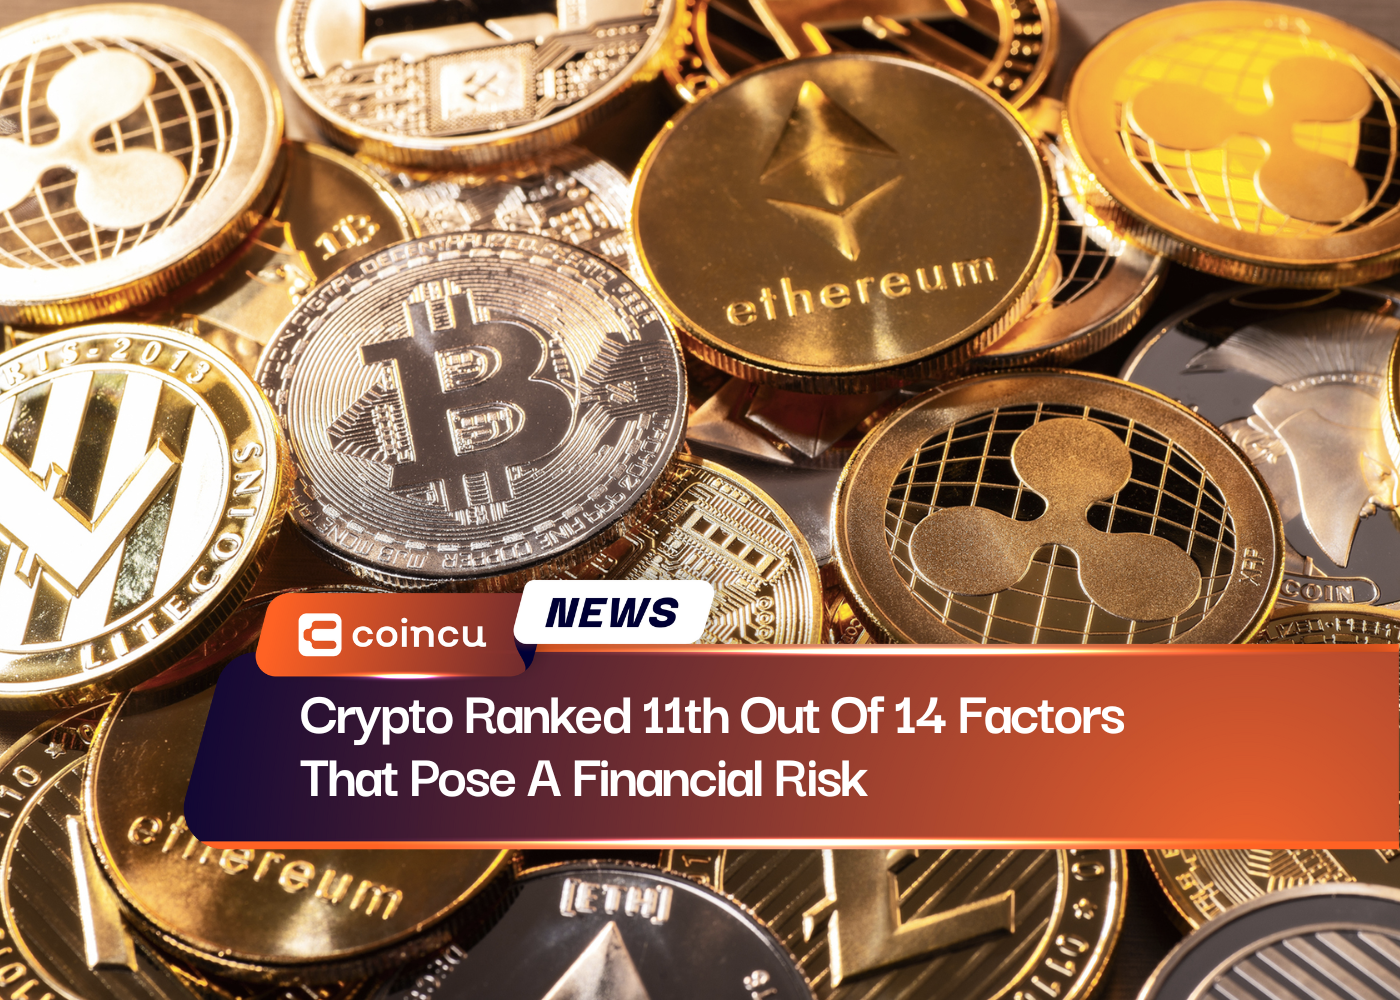 Crypto Ranked 11th Out Of 14 Factors That Pose A Financial Risk